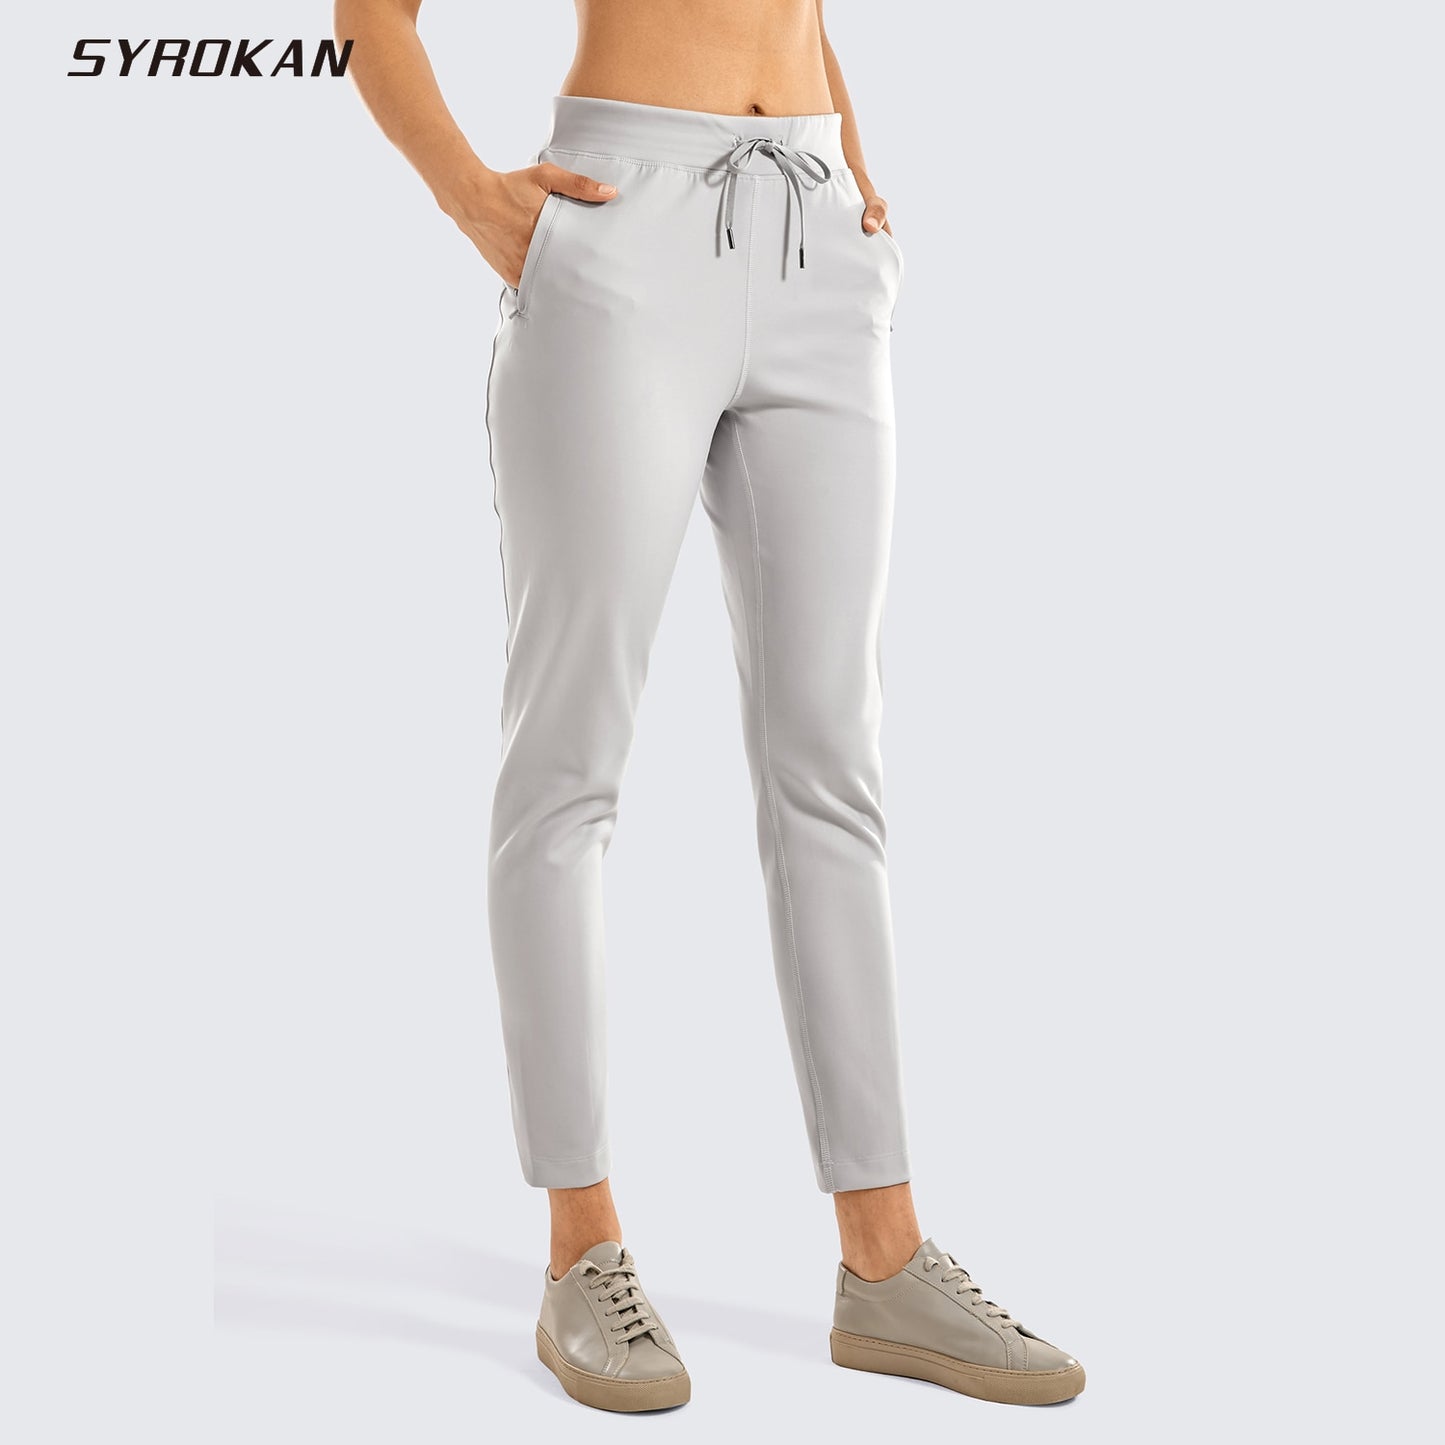 SYROKAN Women&#39;s Stretch Casual Pants Drawstring Jogger Travel Lounge Sweatpants with Zipper Pockets-28 inches